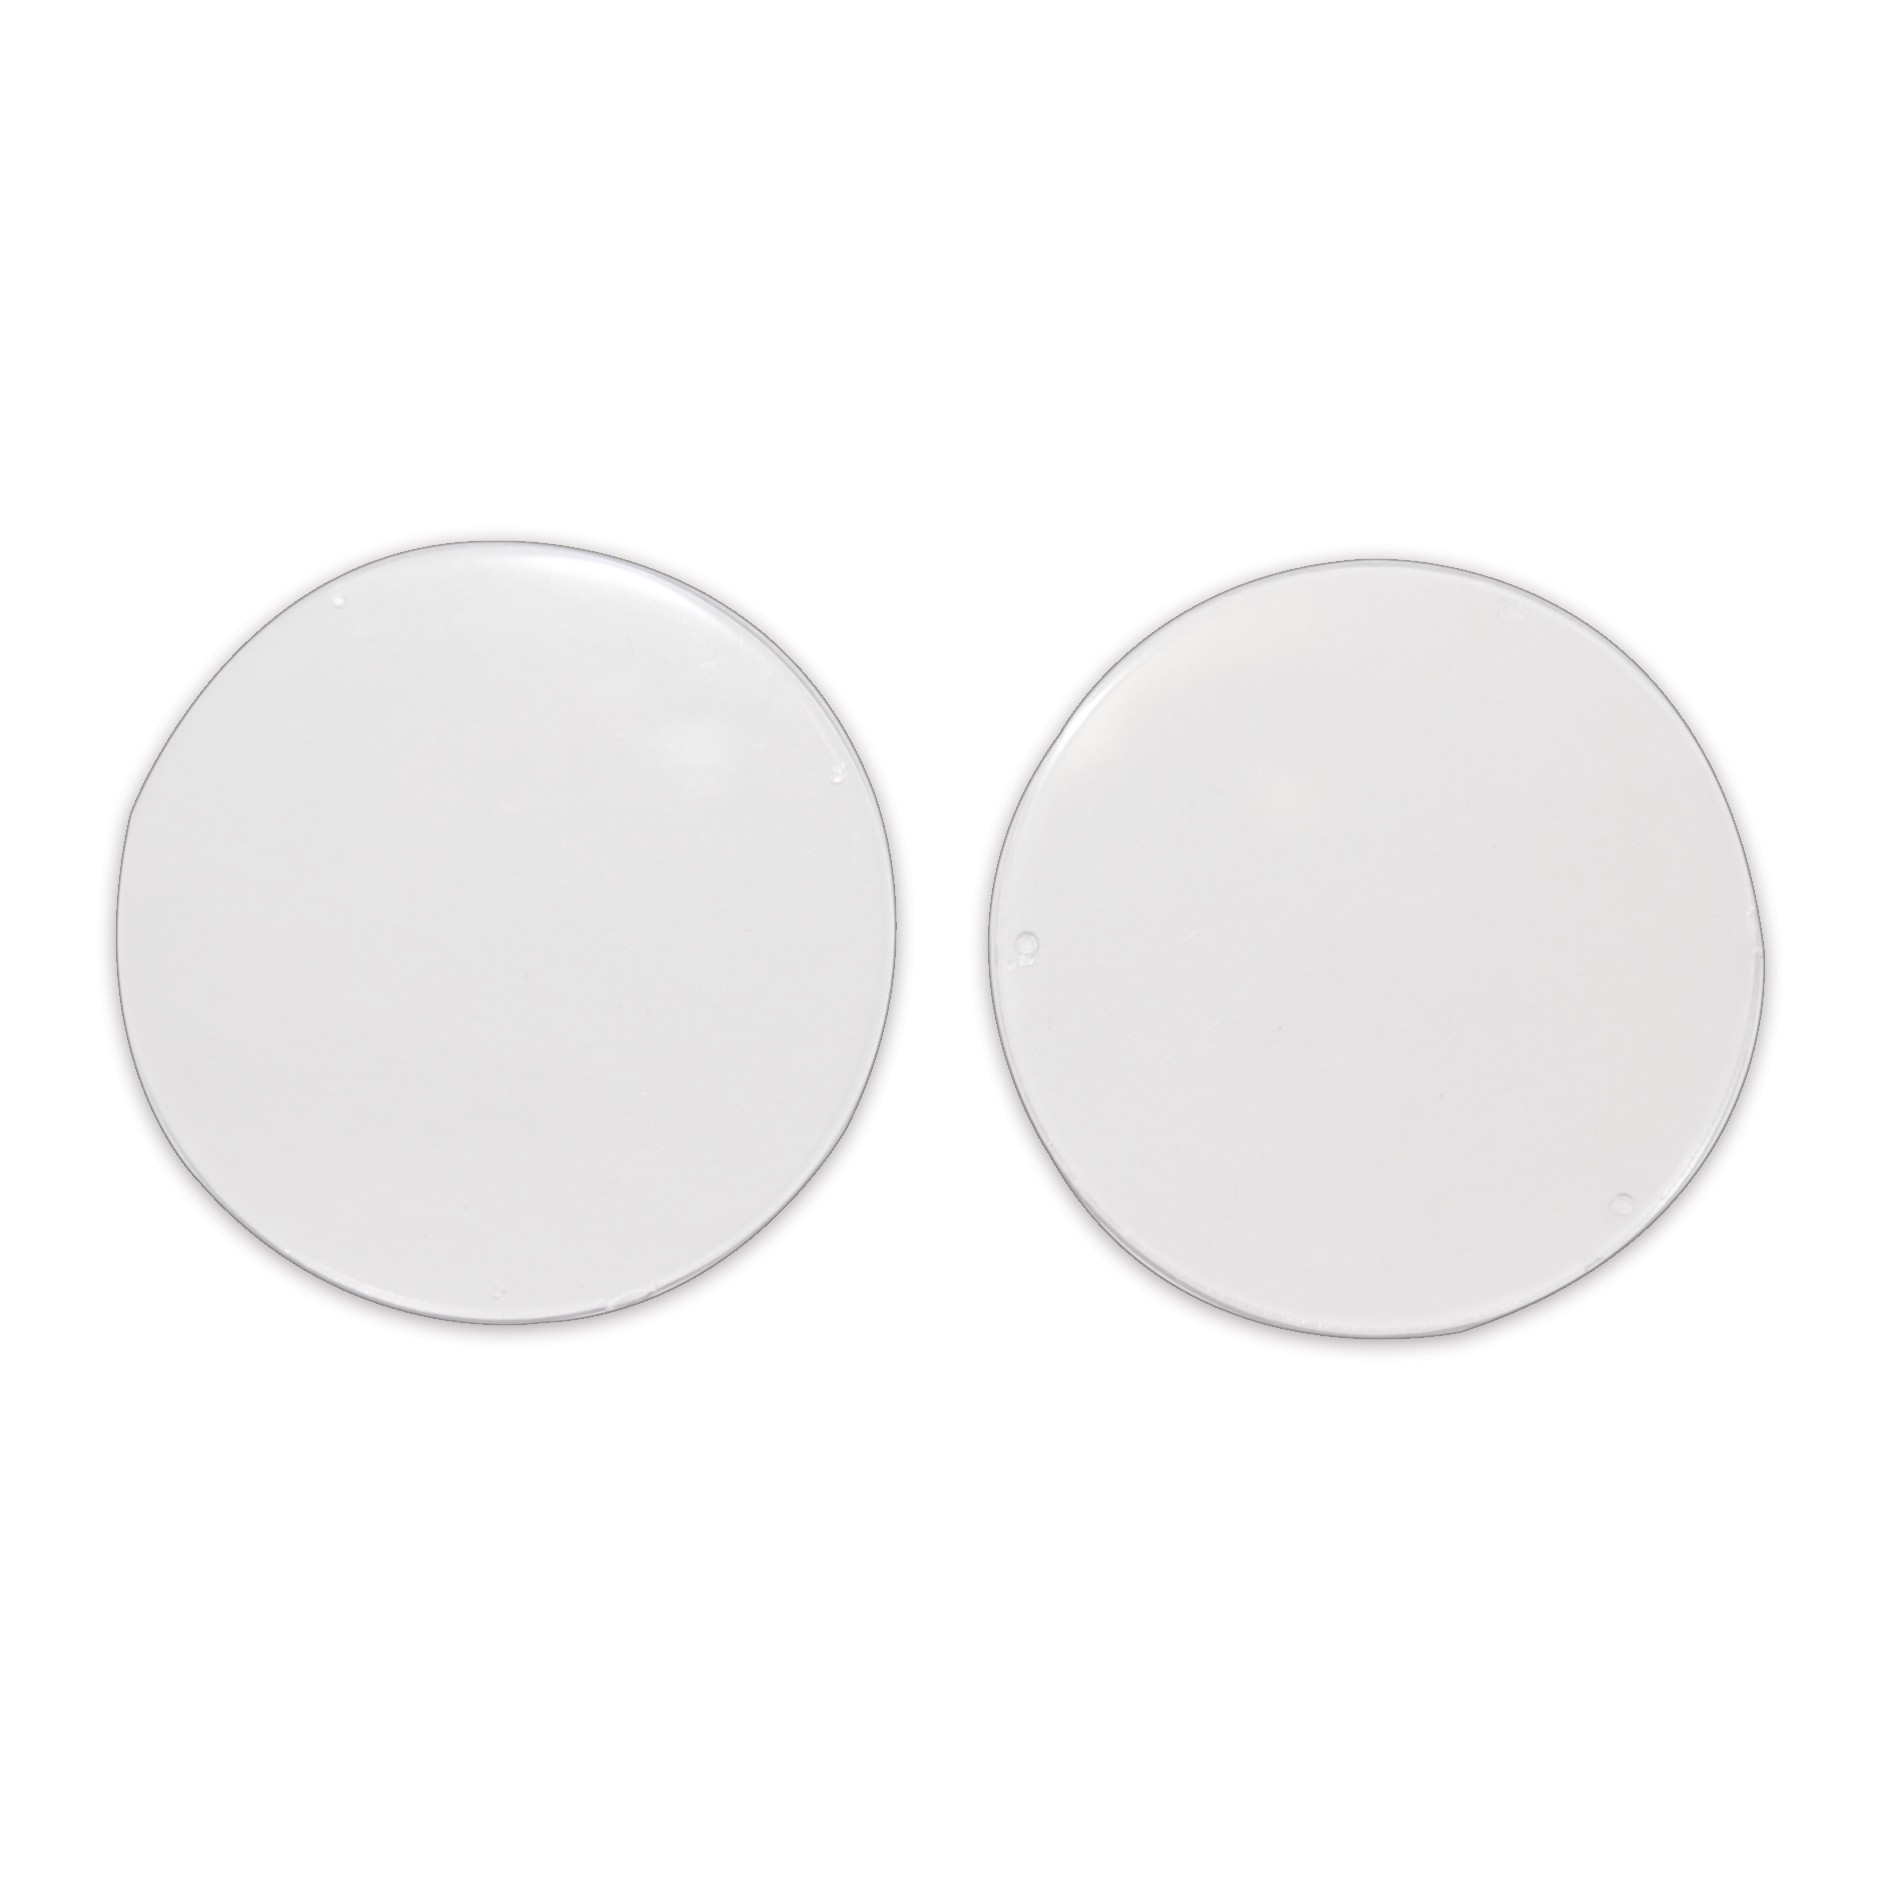 Clear 50mm Replacement Lenses for Welding Cup Goggles (1 Pair)